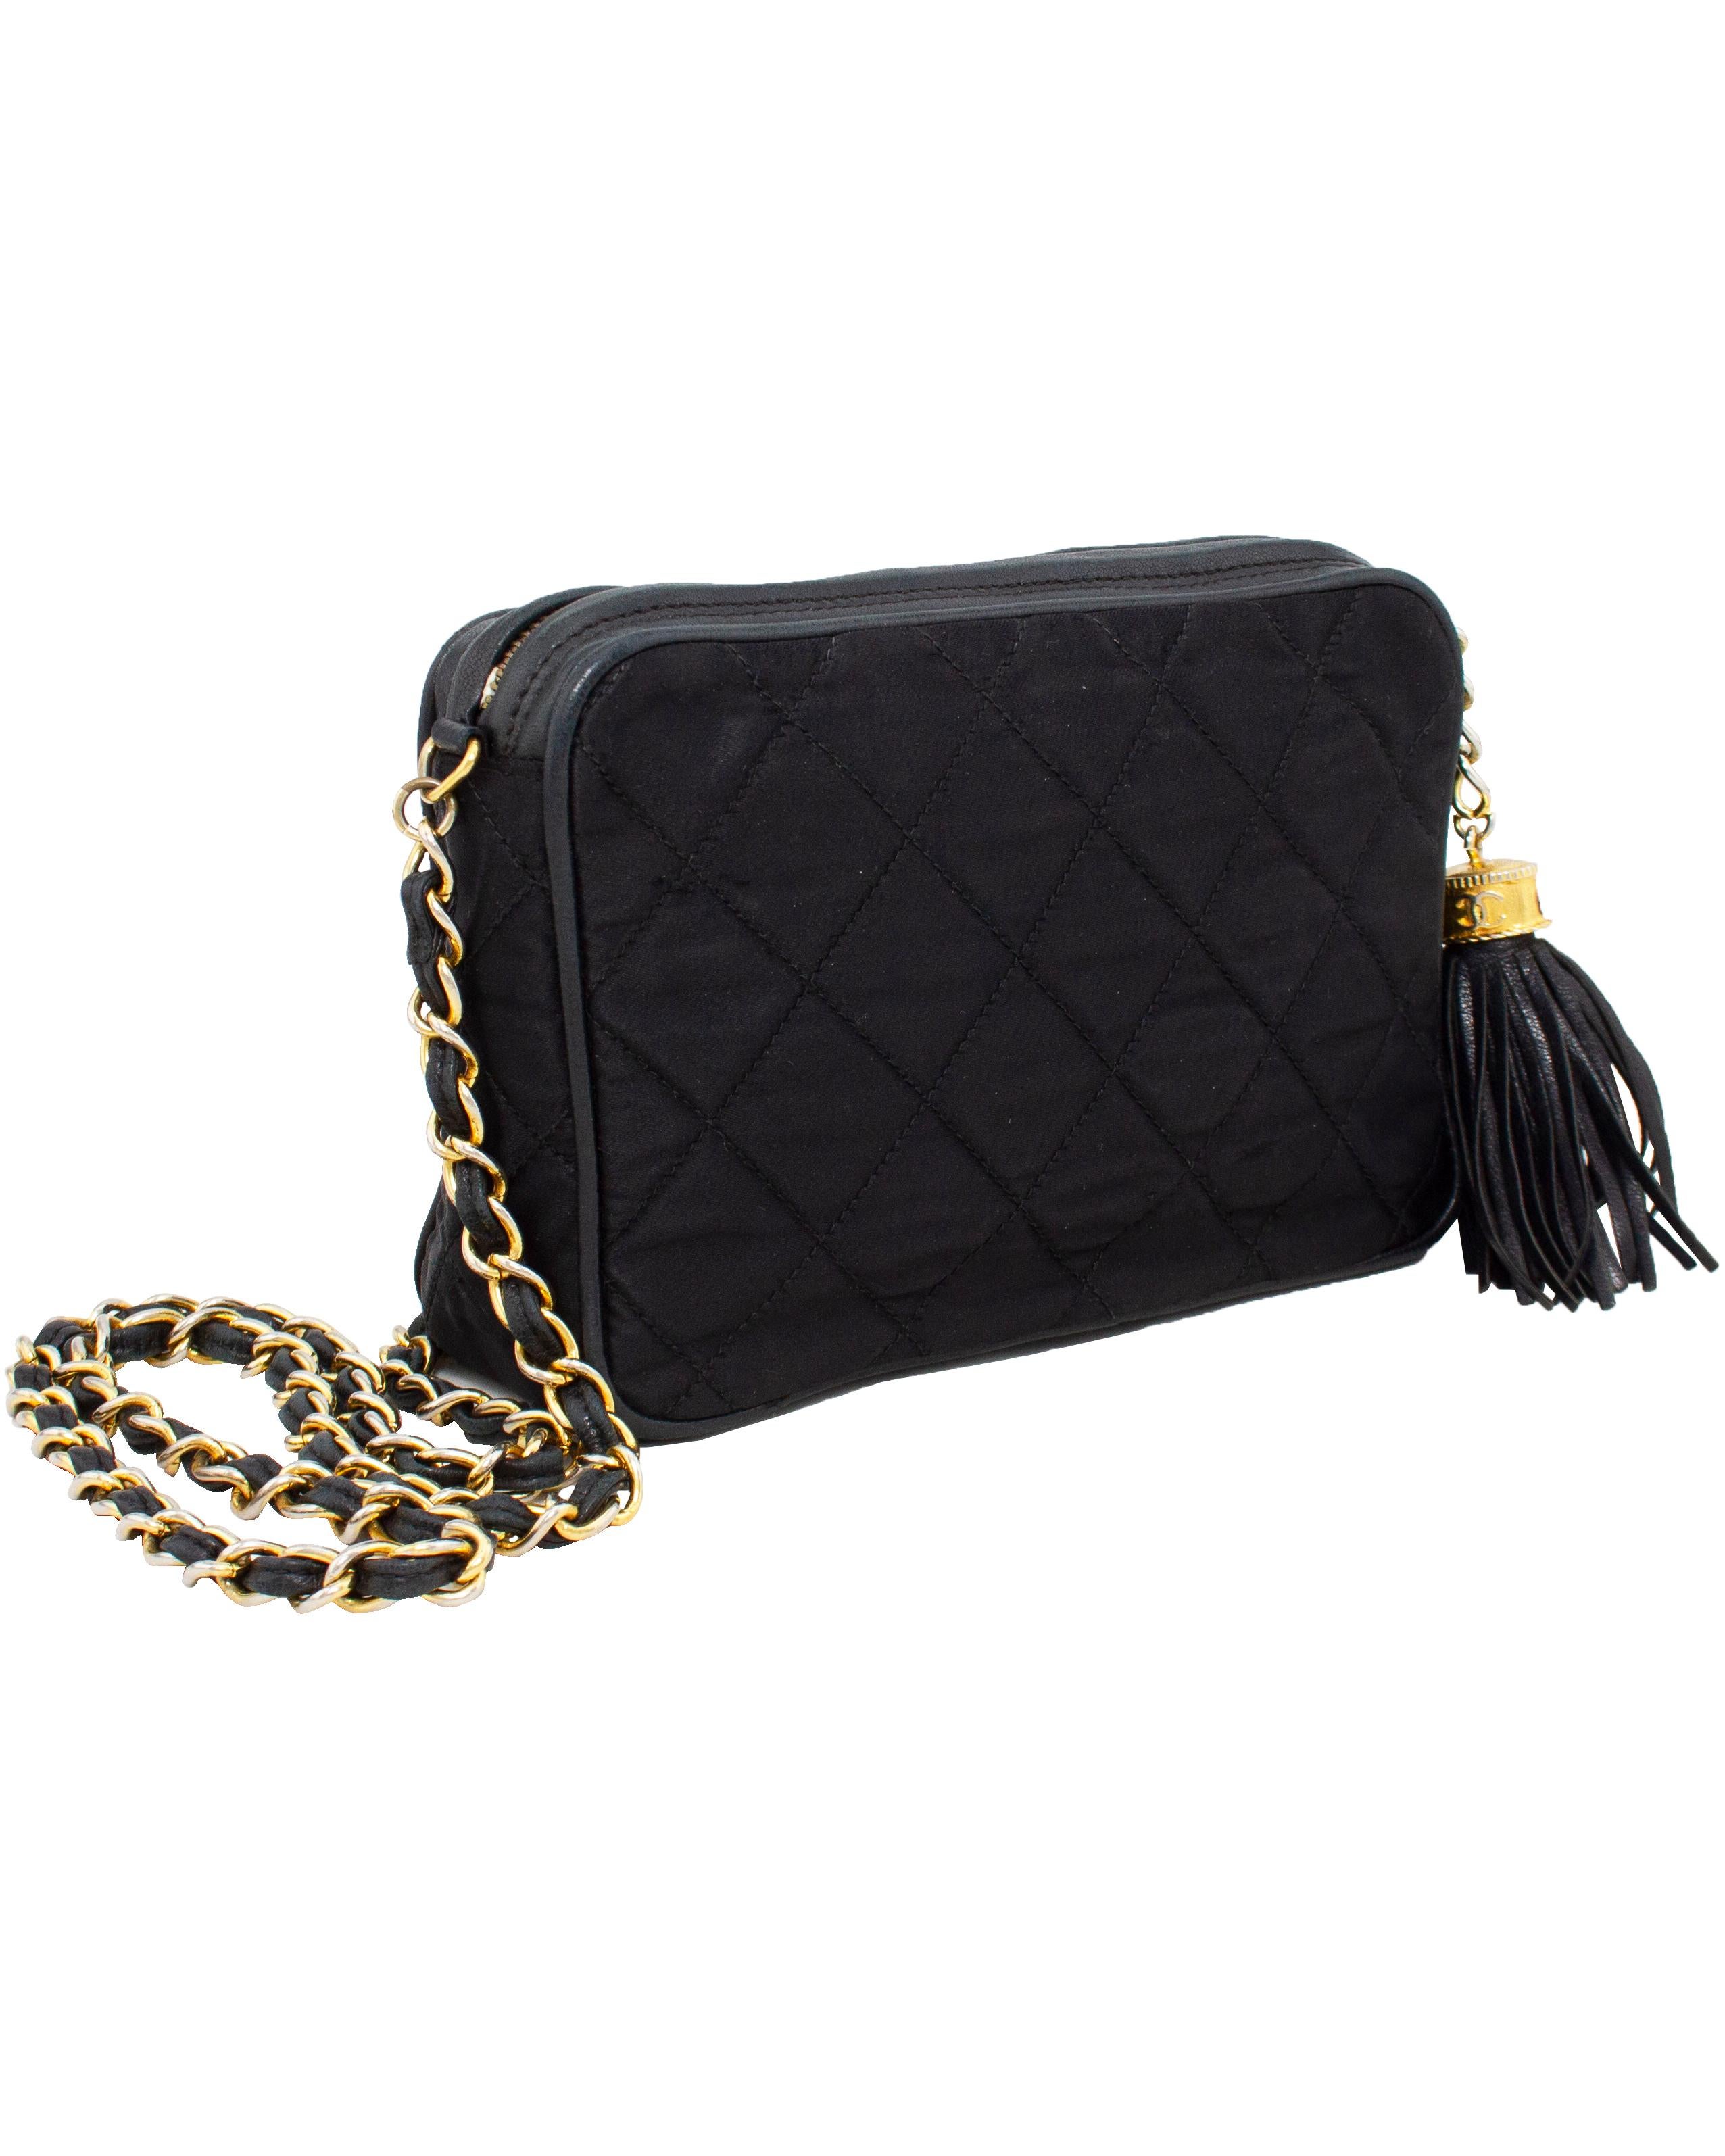 Chanel Bag With 2 Tassels - 3 For Sale on 1stDibs